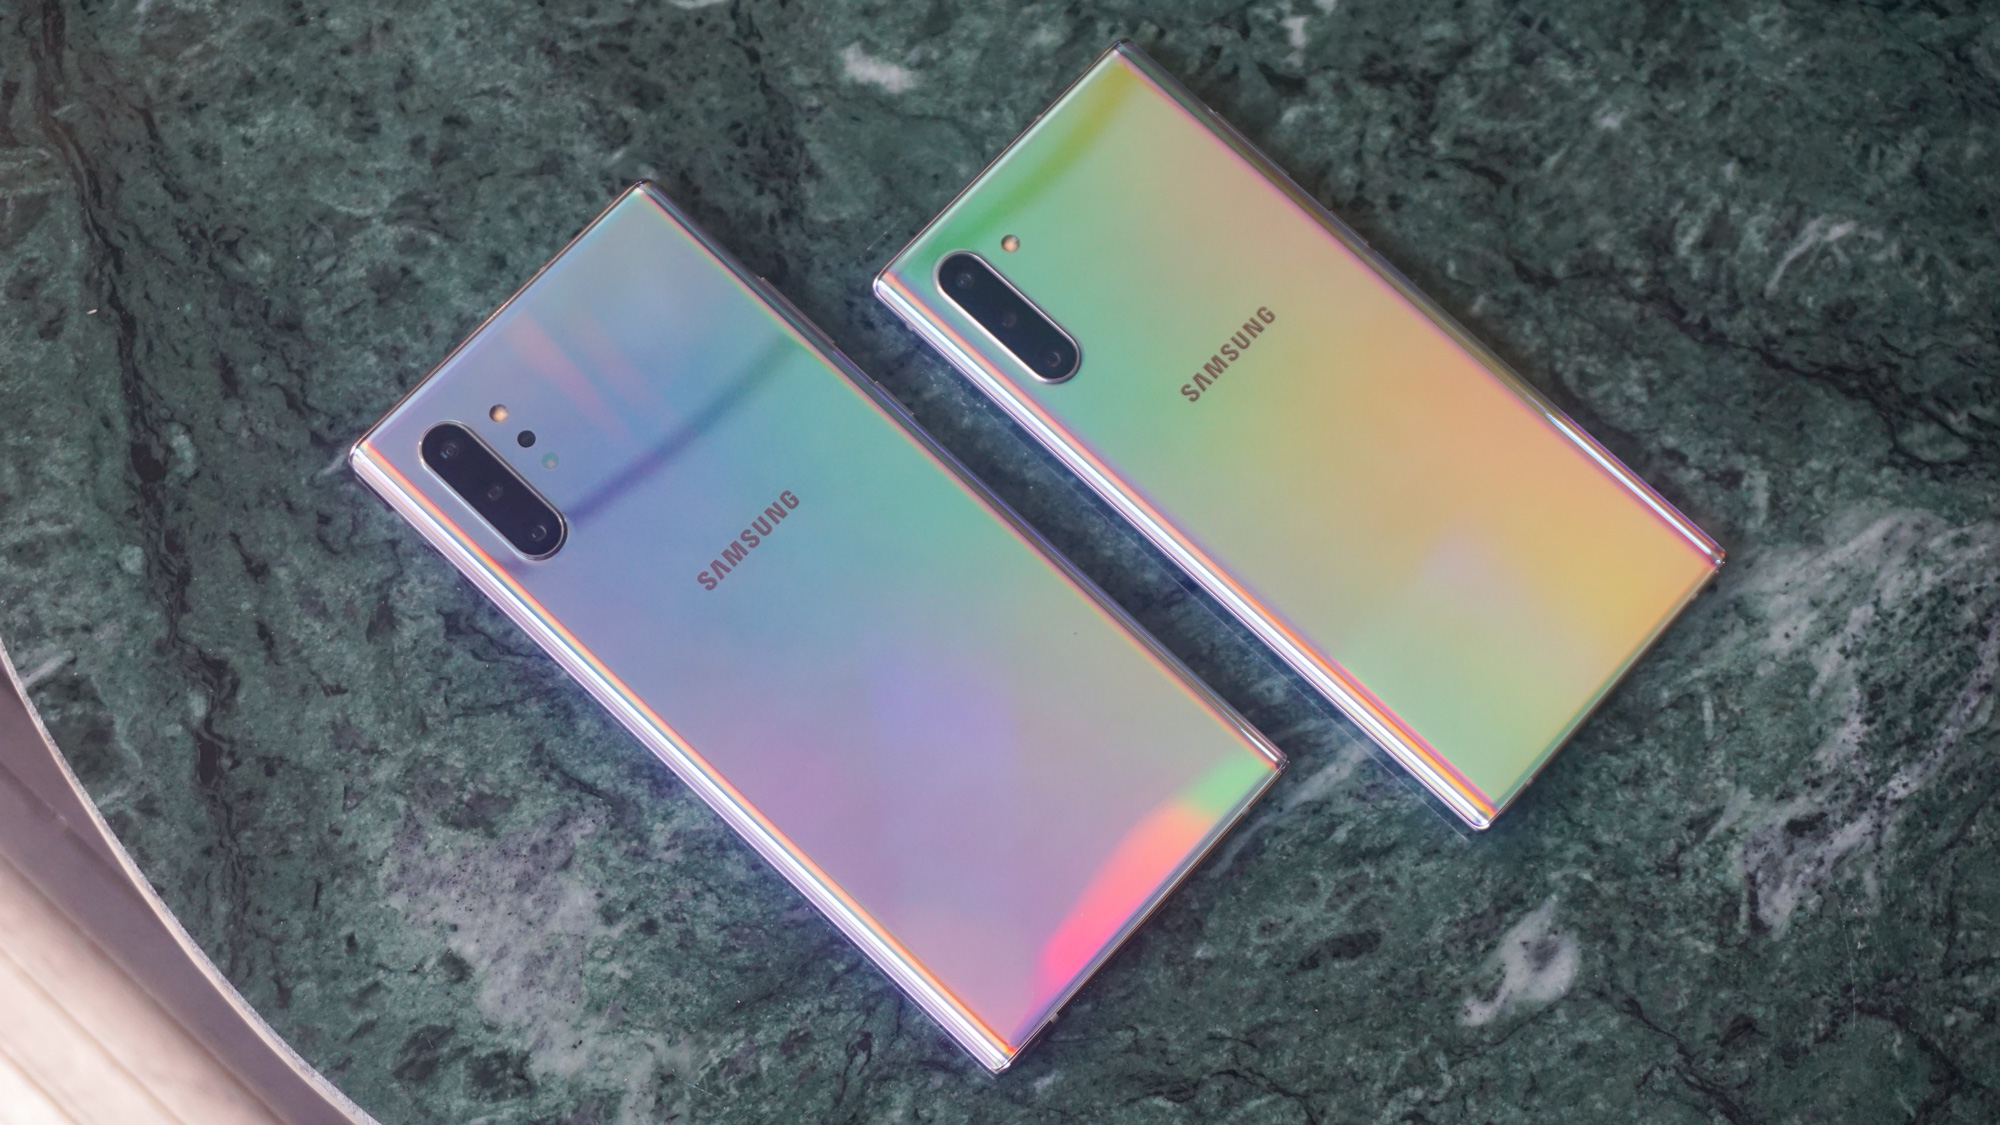 Samsung Galaxy Note 10, Note 10 Plus officially launched in India